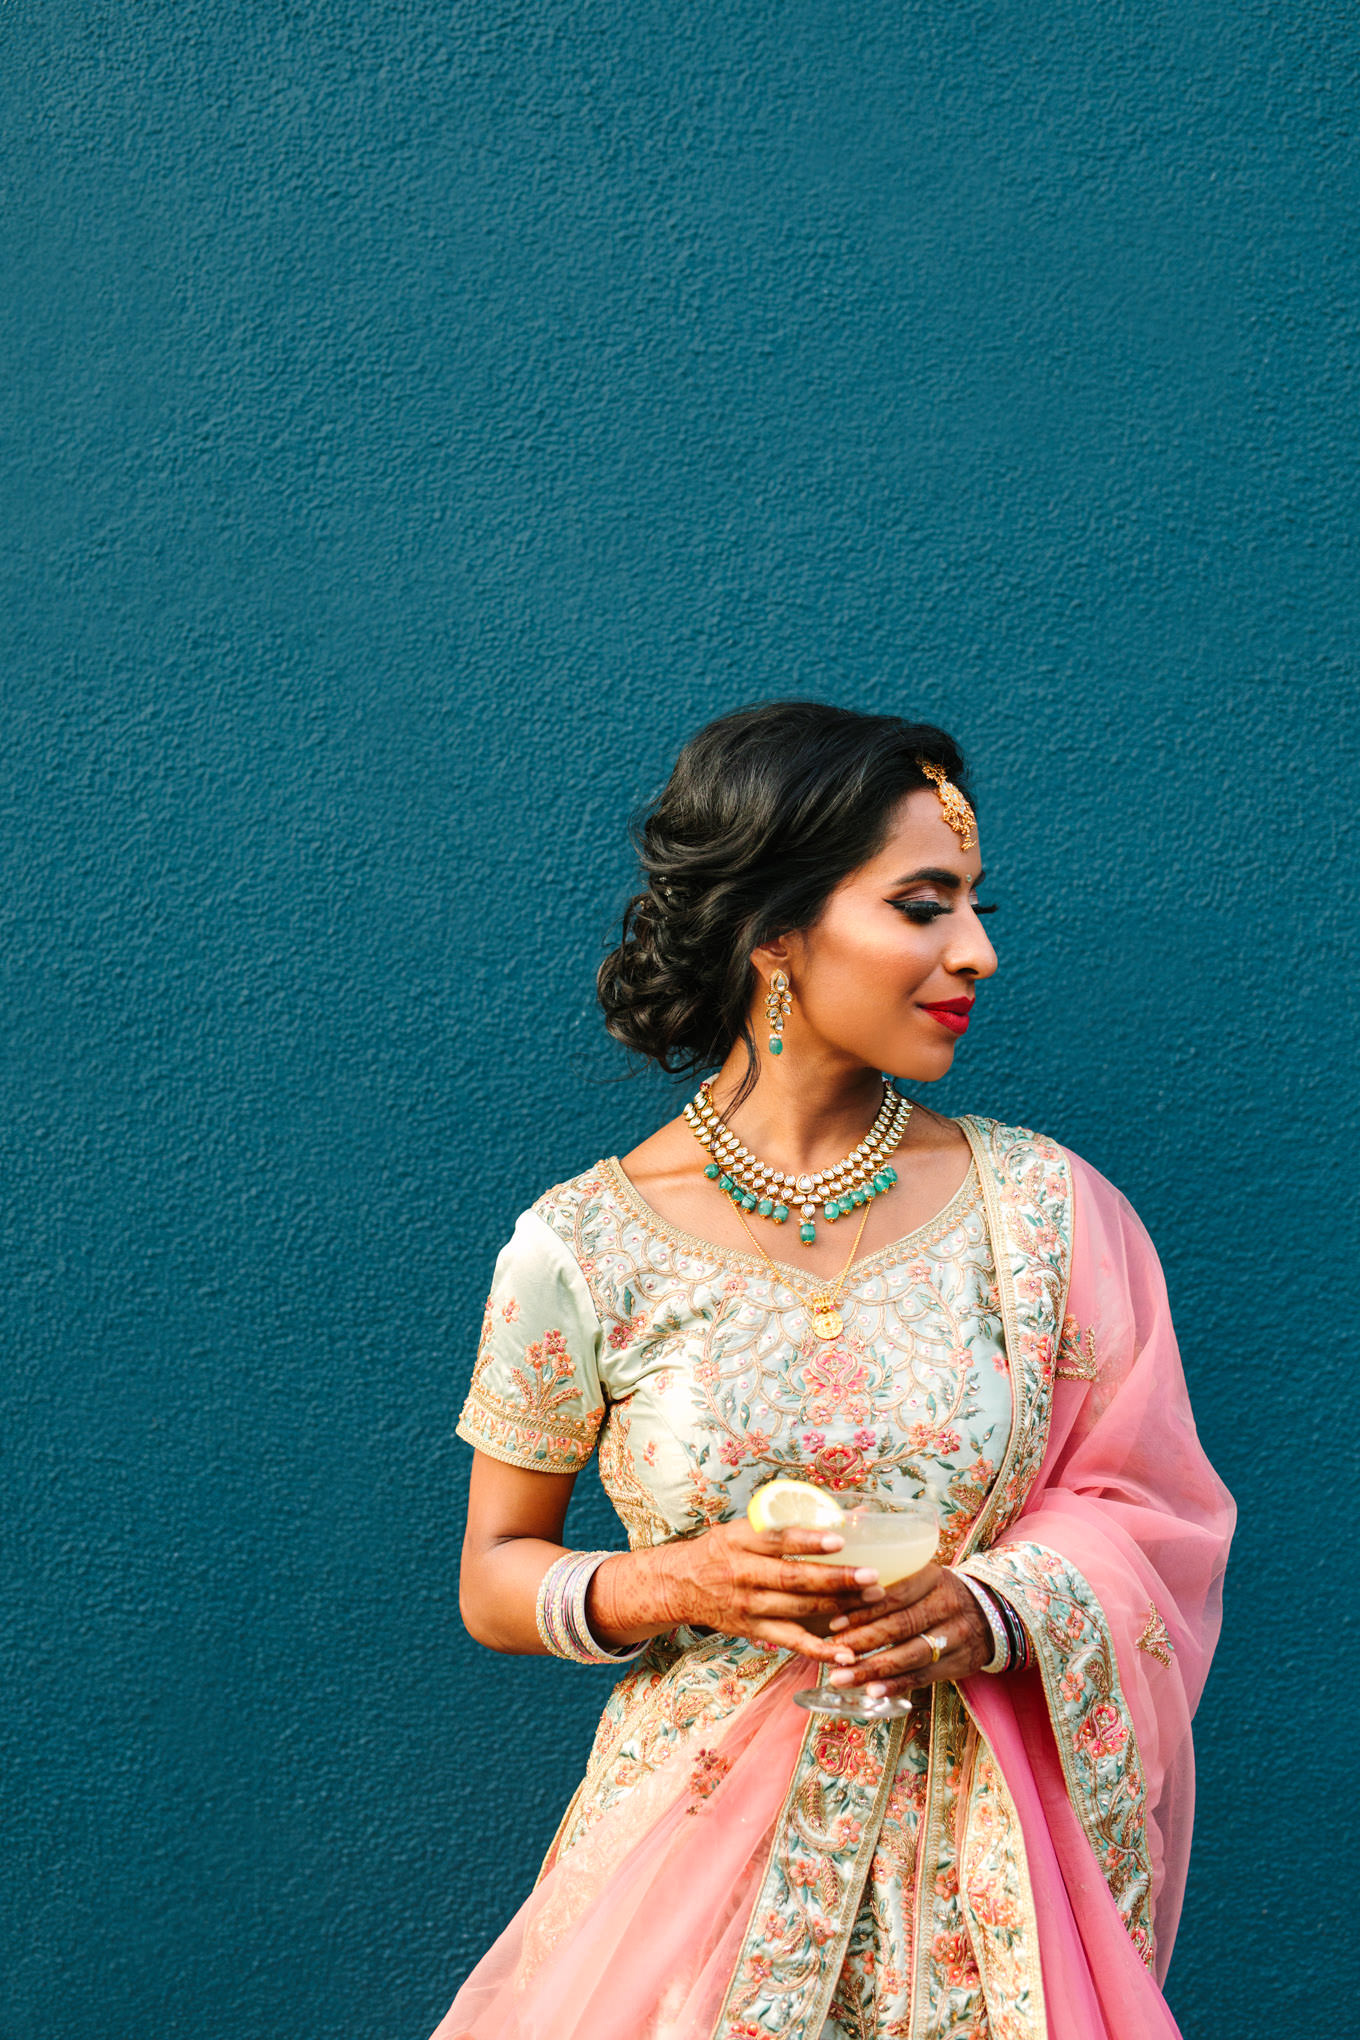 Bride with cocktail in front of teal wall. Two Disney artists create a unique and colorful Indian Fusion wedding at The Fig House Los Angeles, featured on Green Wedding Shoes. | Colorful and elevated wedding inspiration for fun-loving couples in Southern California | #indianwedding #indianfusionwedding #thefighouse #losangeleswedding   Source: Mary Costa Photography | Los Angeles